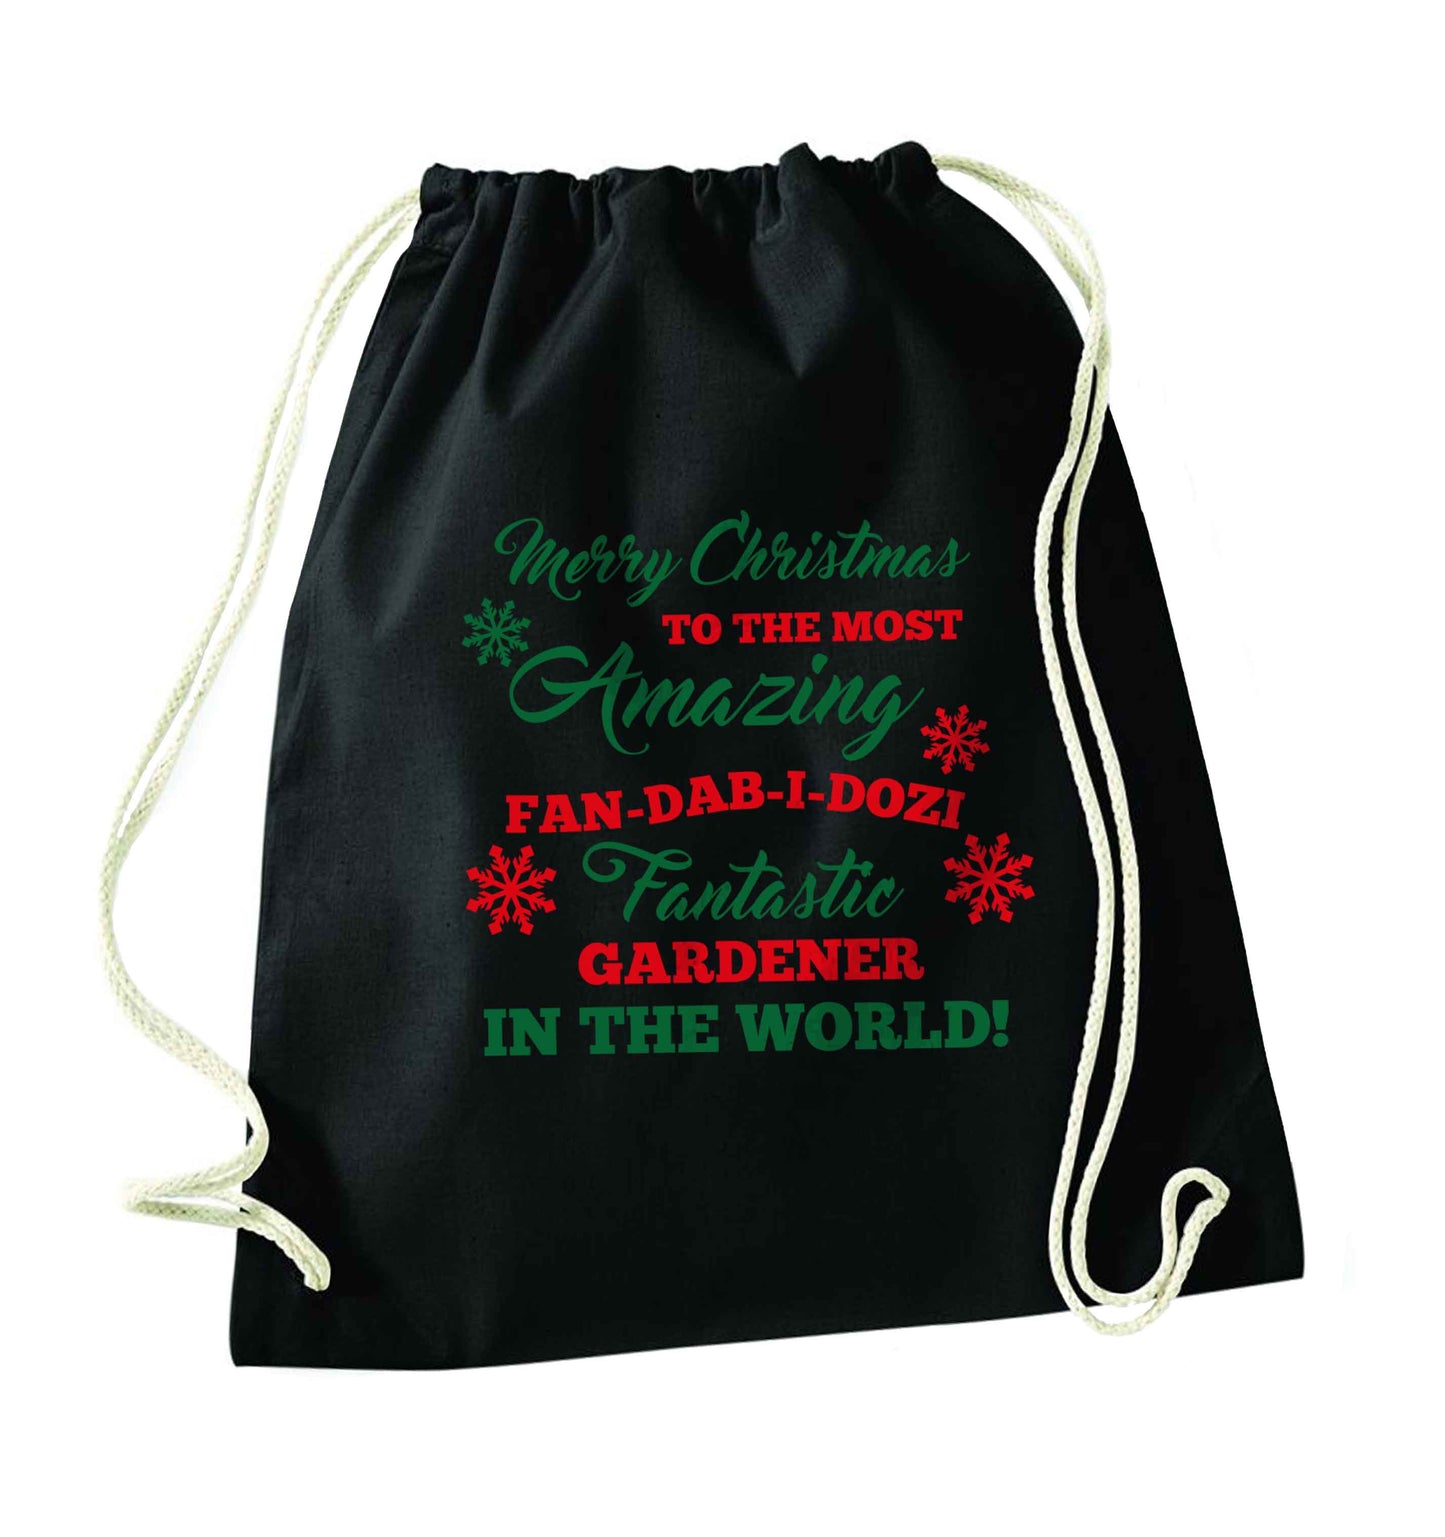 Merry Christmas to the most amazing gardener in the world! black drawstring bag